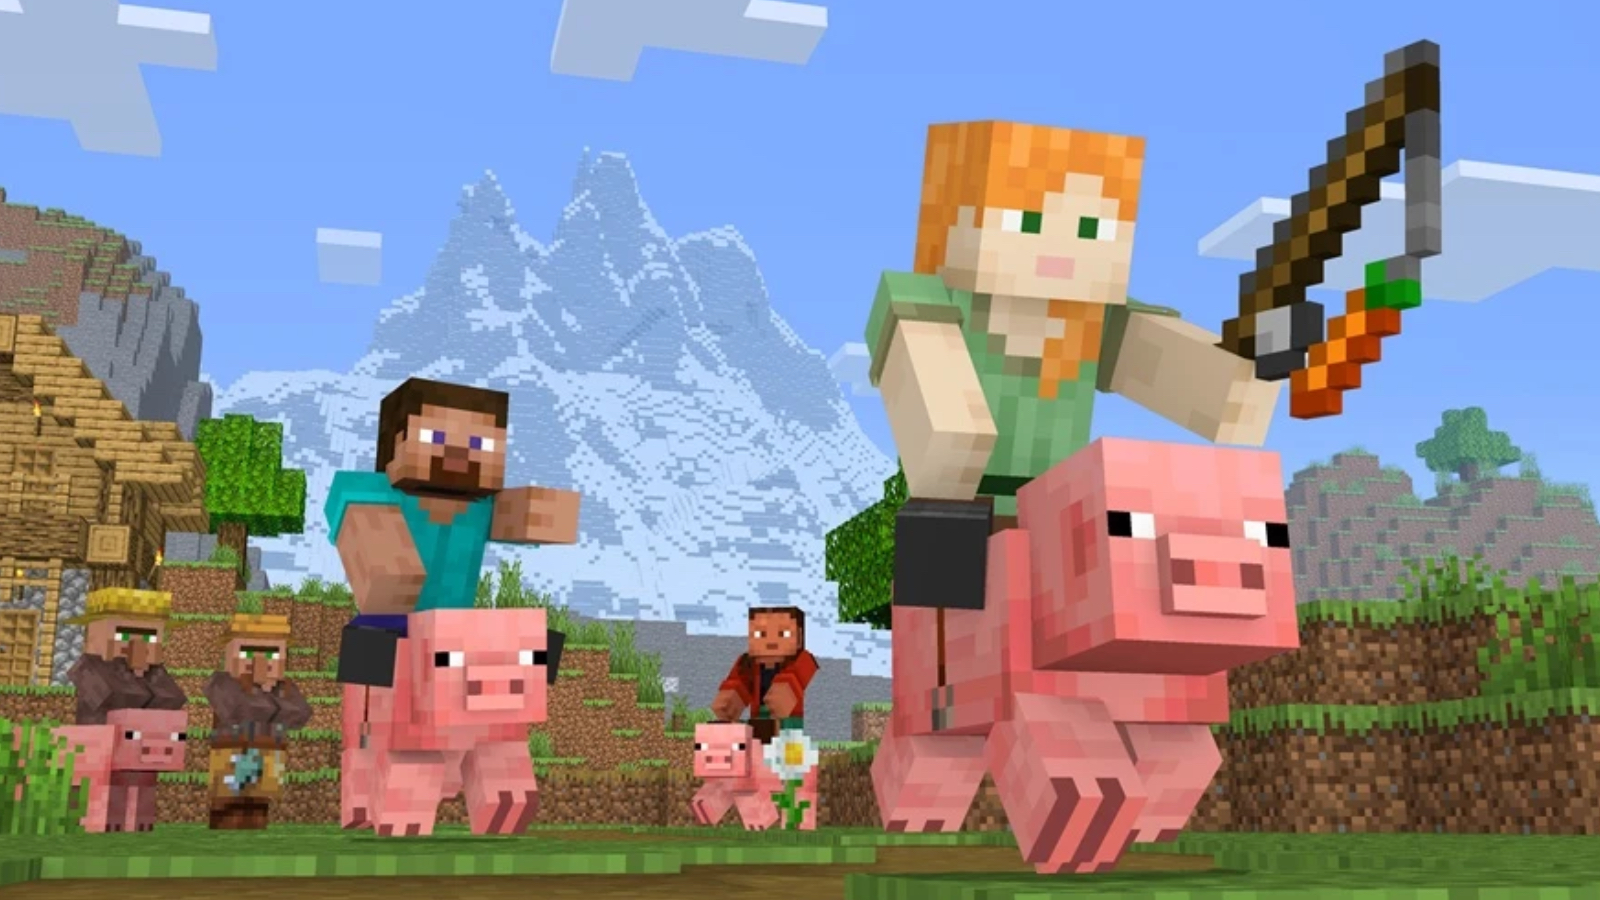 Minecraft Curse of Vanishing: What It Is and How to Cure It